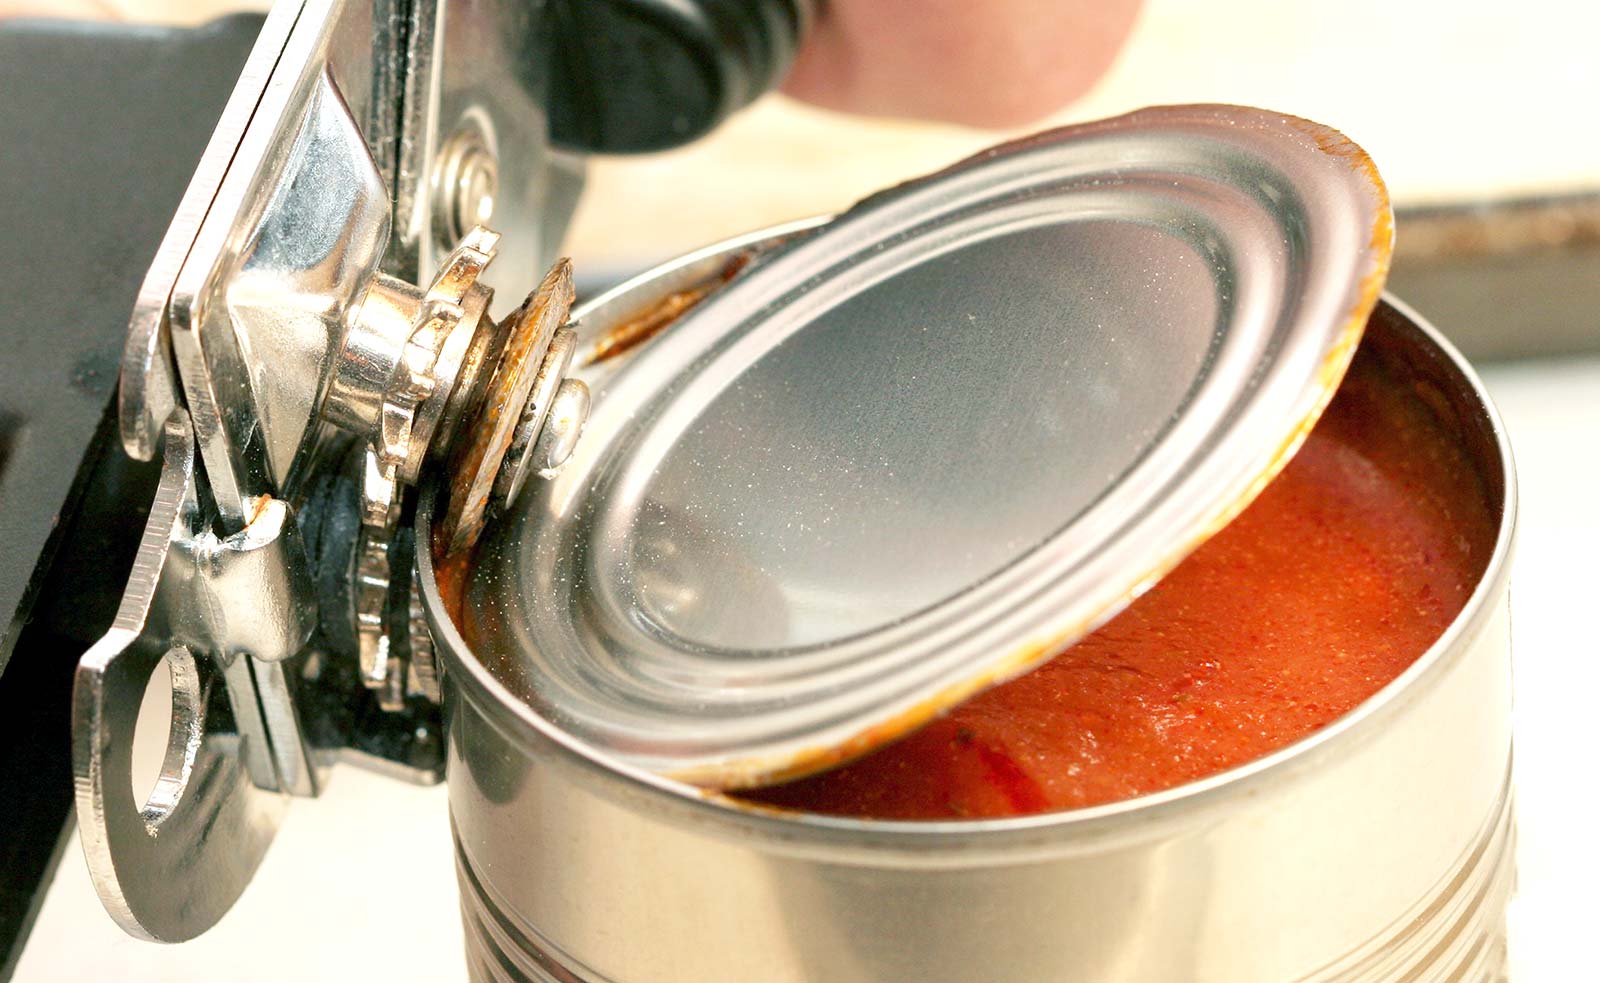 Sorry, You’re Not a Grown-Up If You Don’t Own at Least 13/25 of These Kitchen Things Can Opener